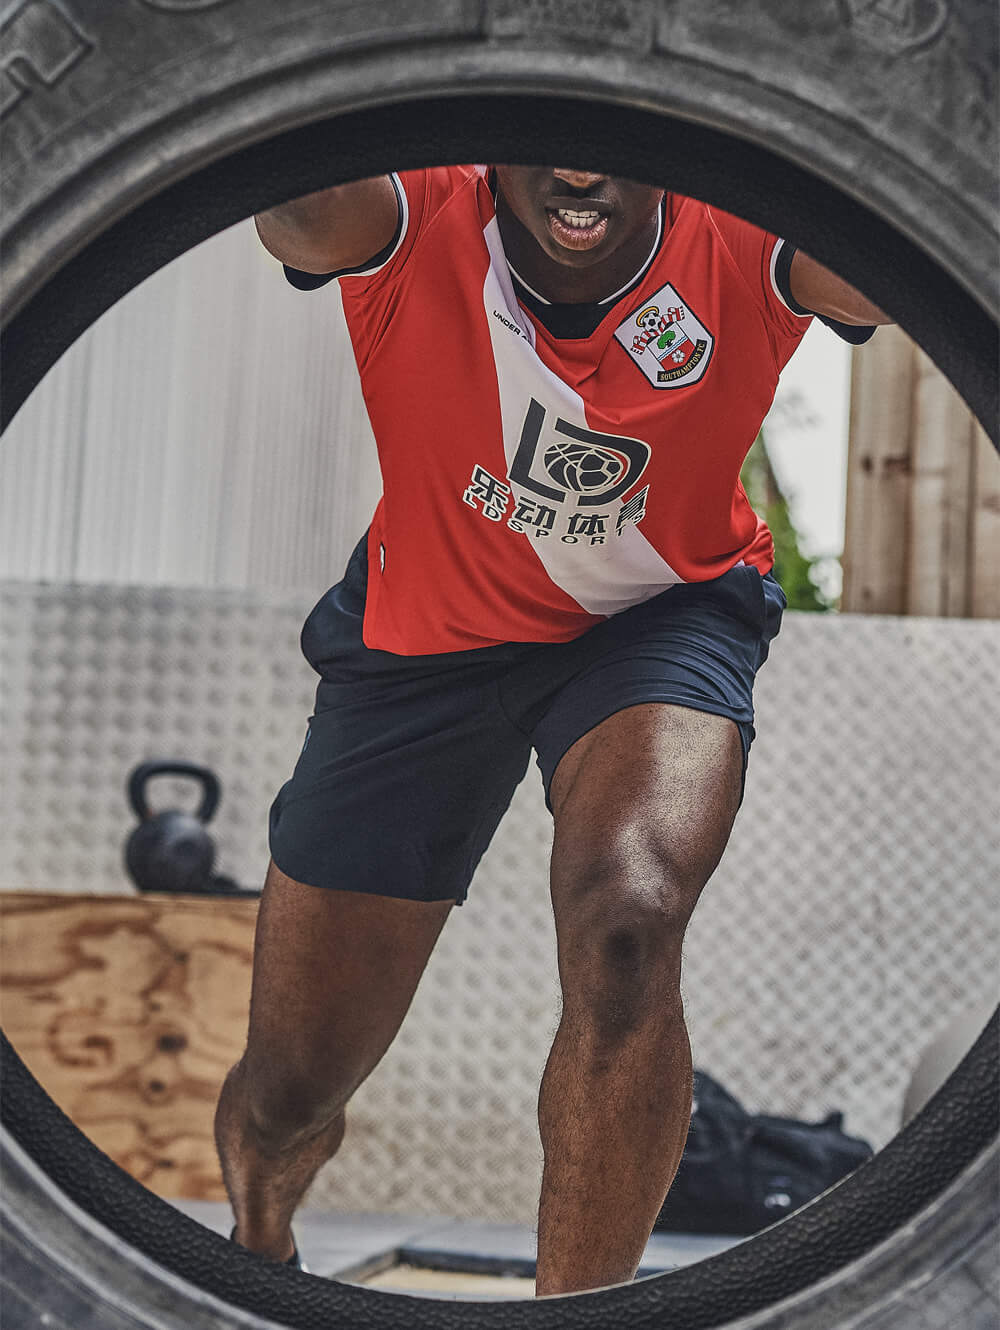 football player excersising with a tractor tyre, wearing a red and white southampton fc shirt